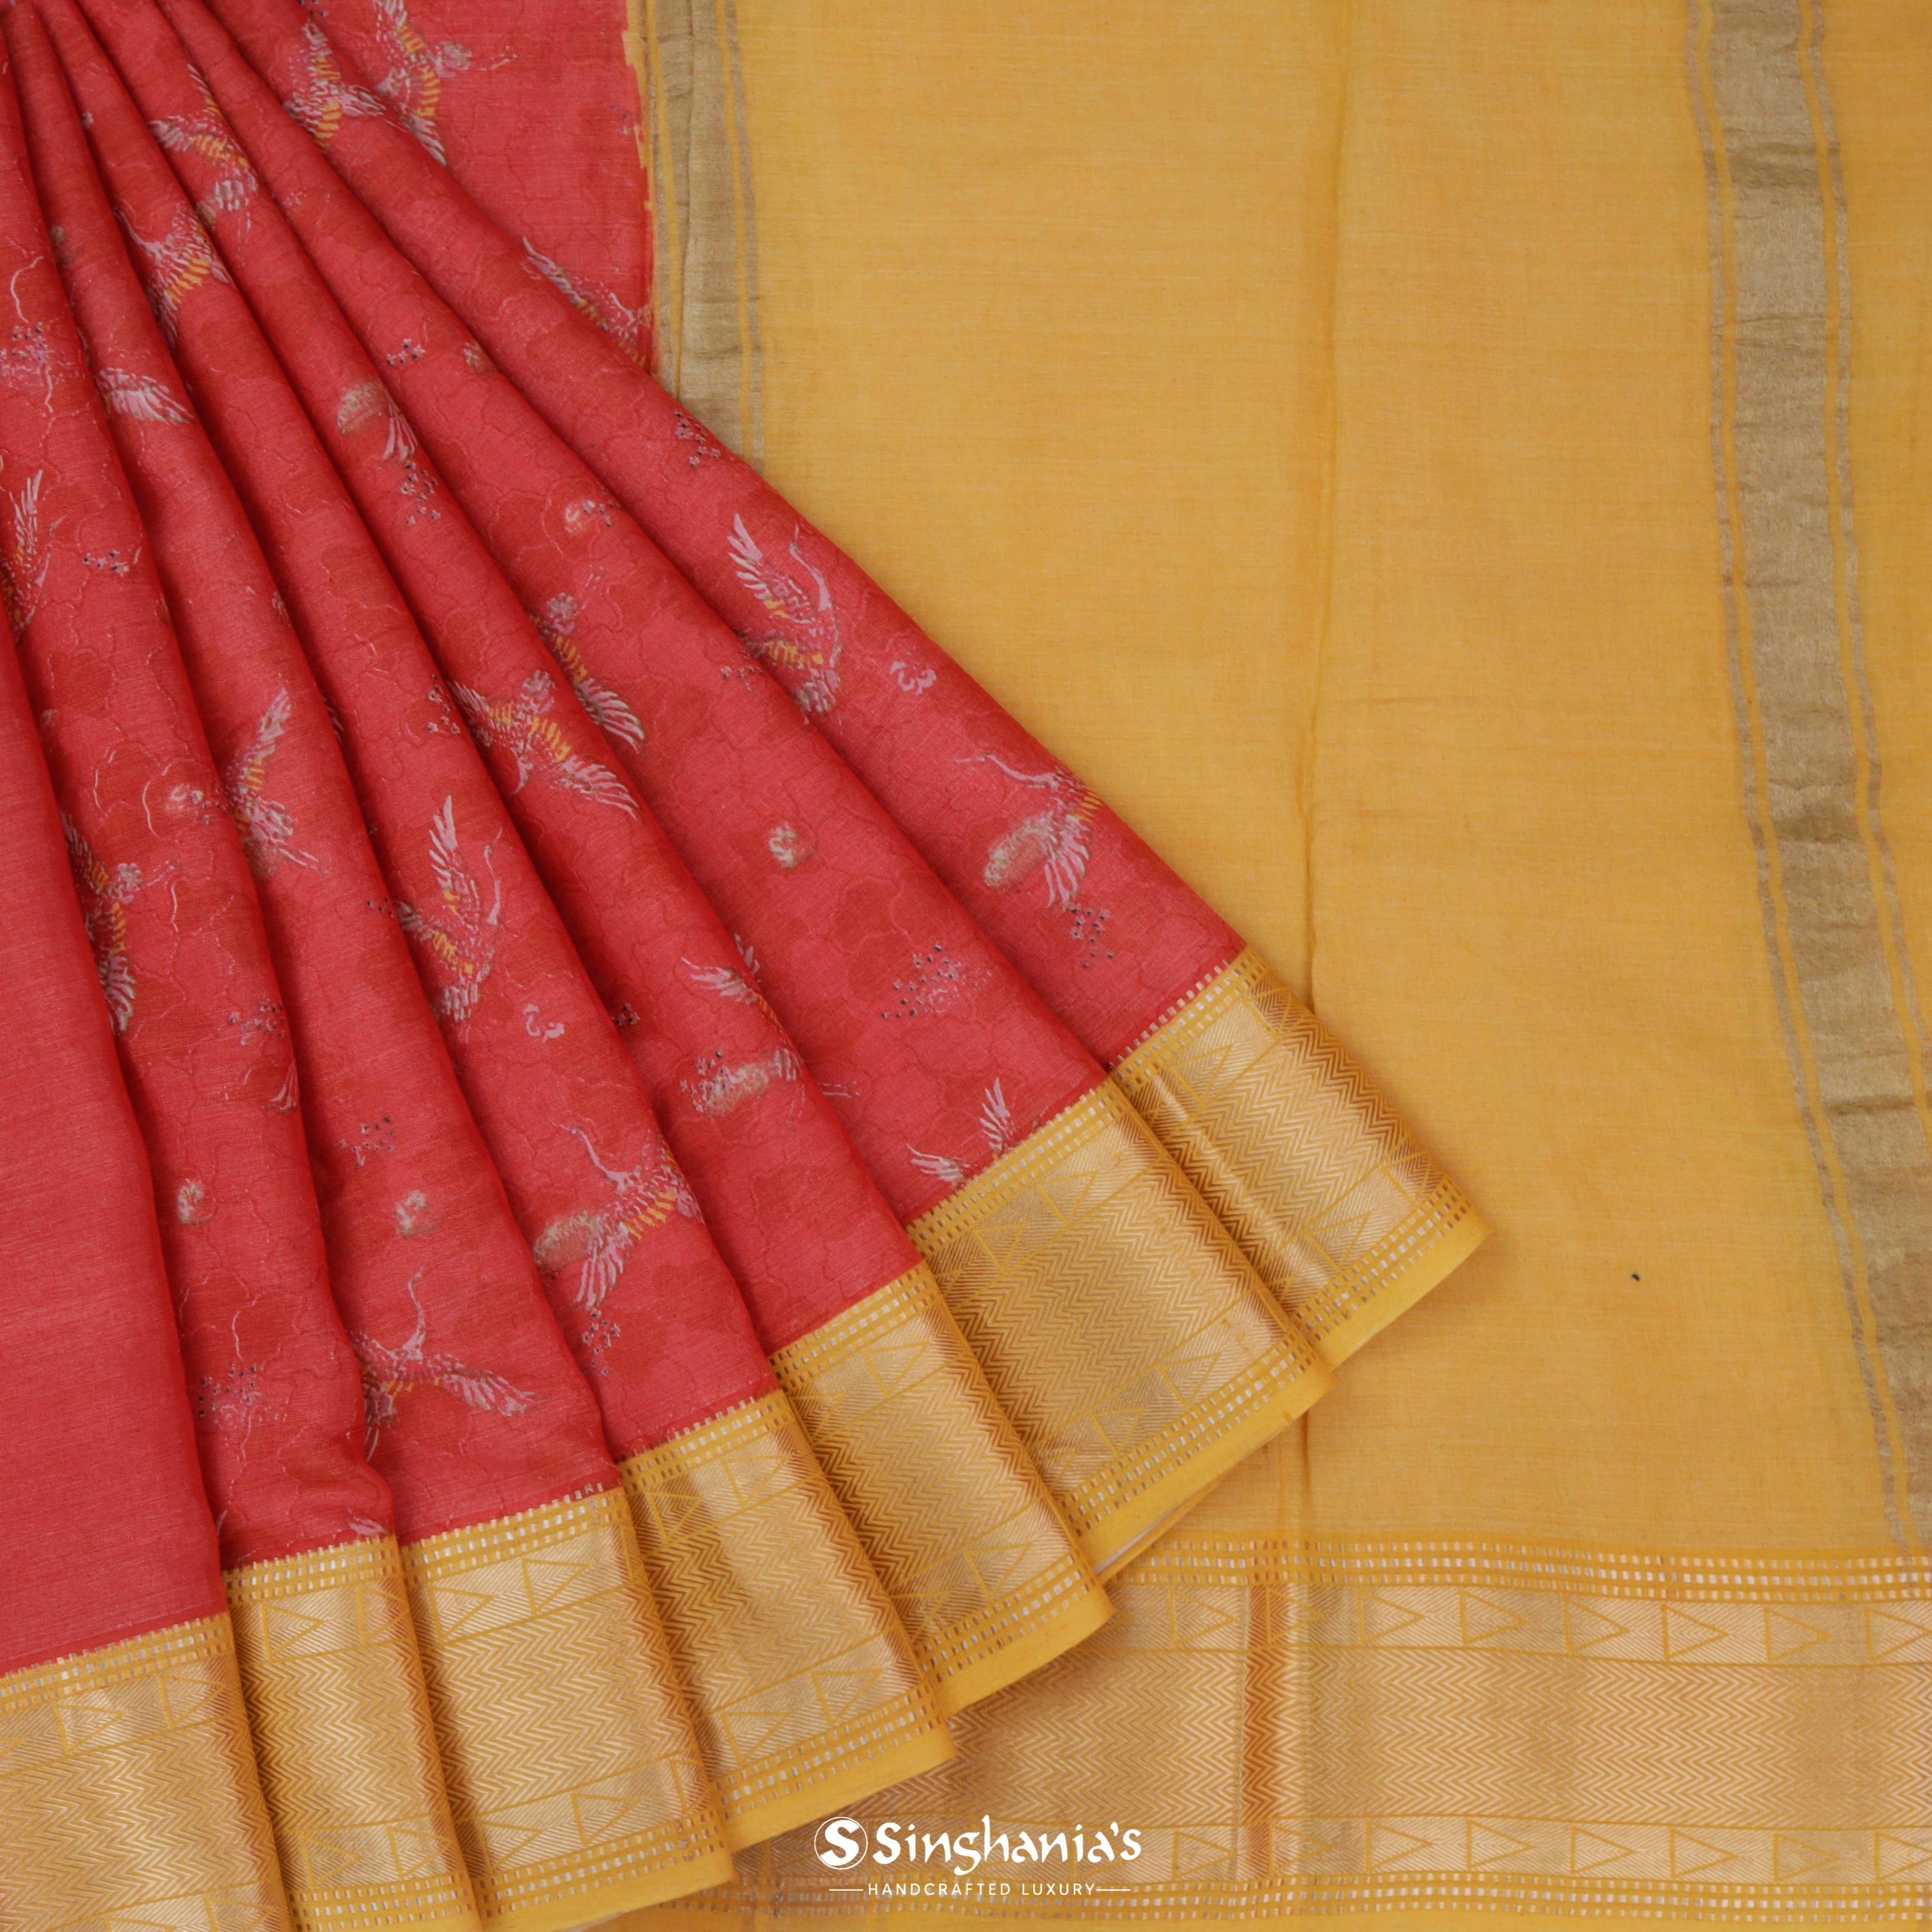 Amaranth Red Cotton Printed Saree With Nature Inspired Birds Motifs